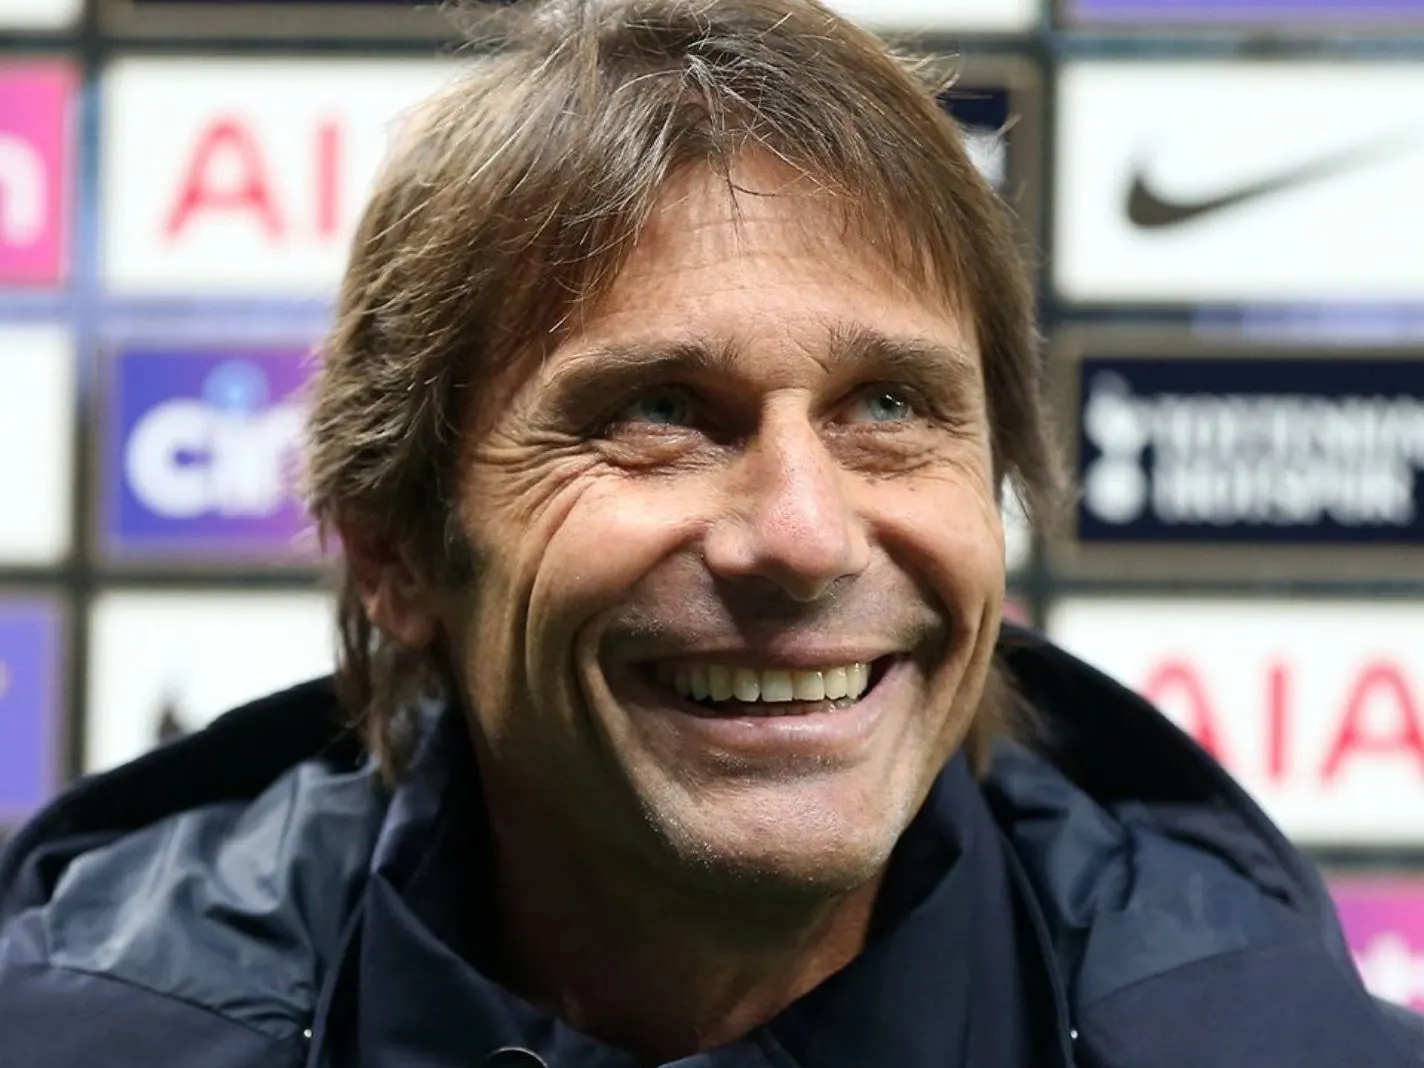 Antonio Conte is all smiles after win against Norwich City